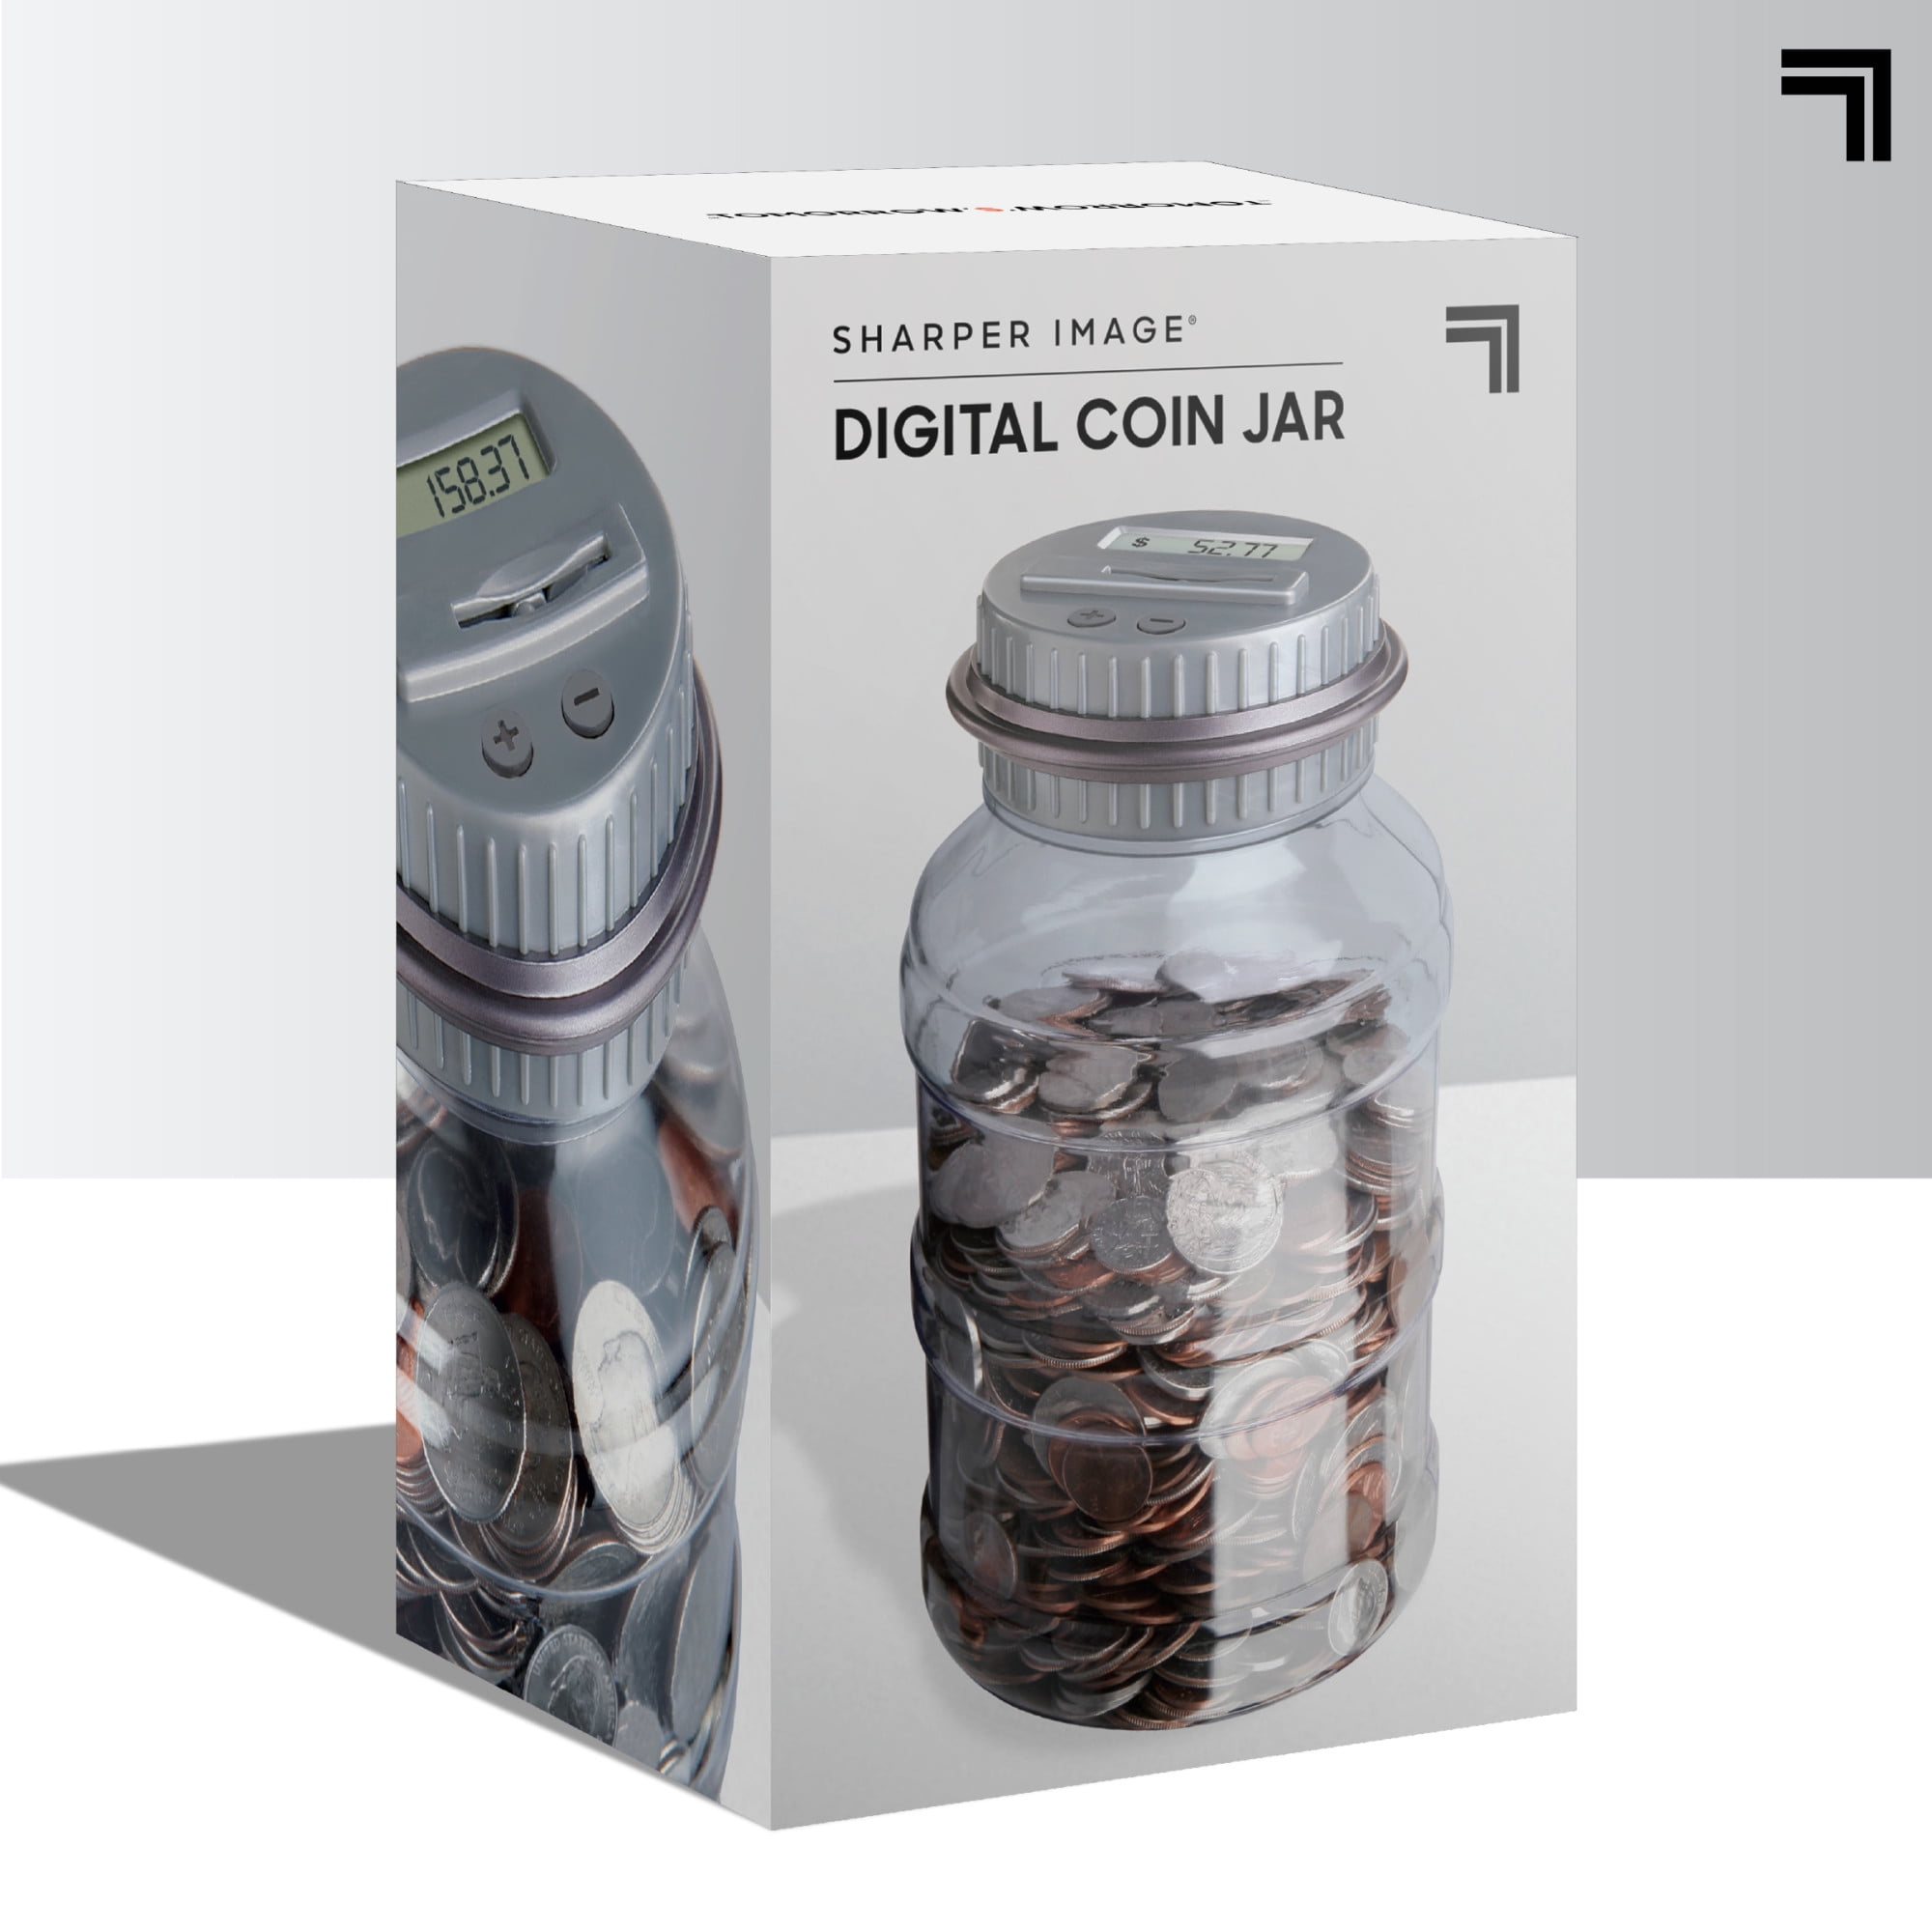 Platinum collection digital coin counting money jar new in box.sold separately. 